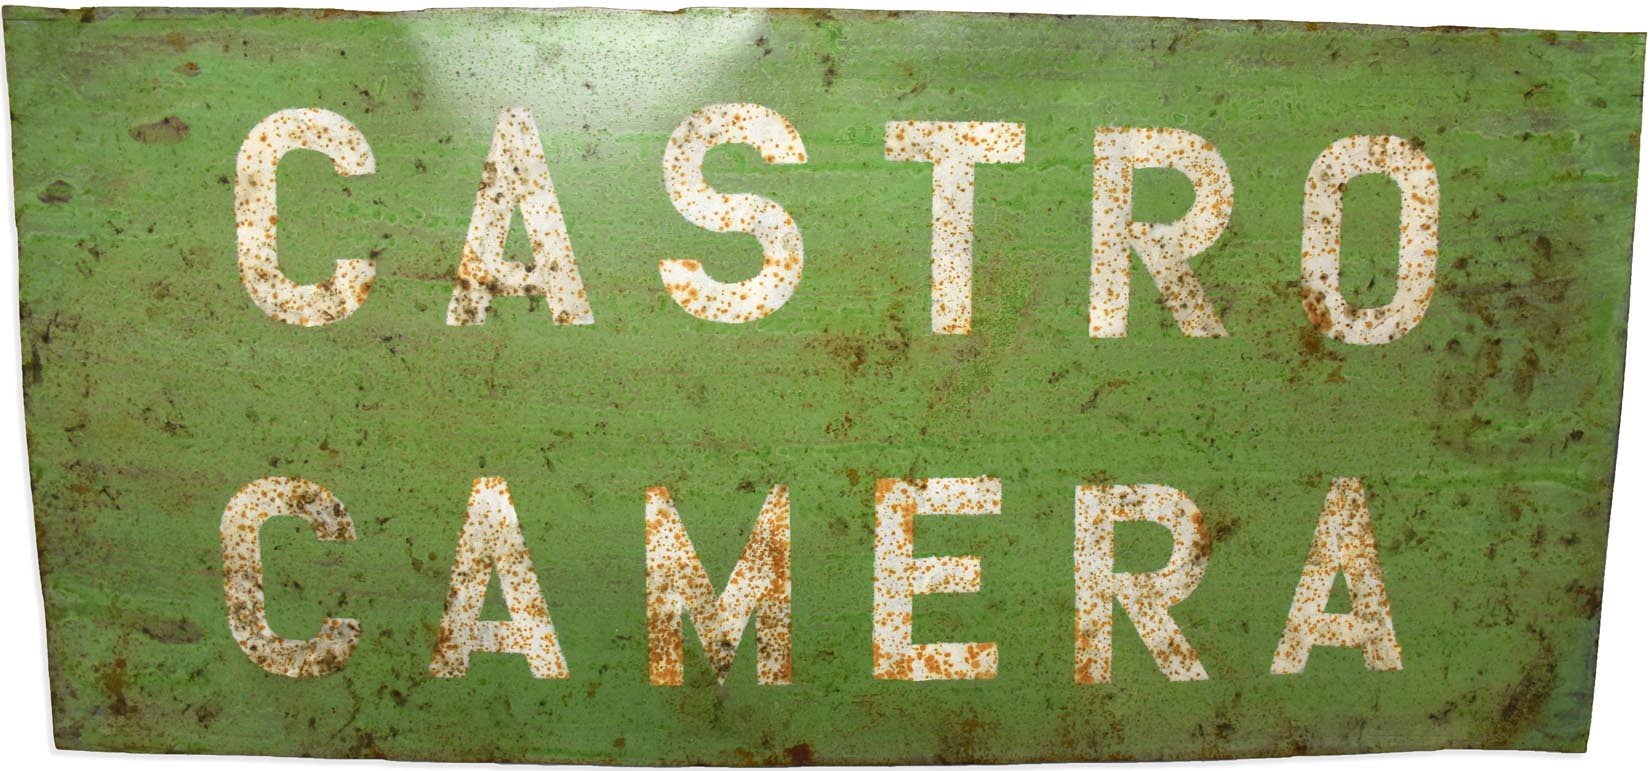 Rock And Pop Culture - 1960s "Castro Camera" Sign from Harvey Milk's Camera Store